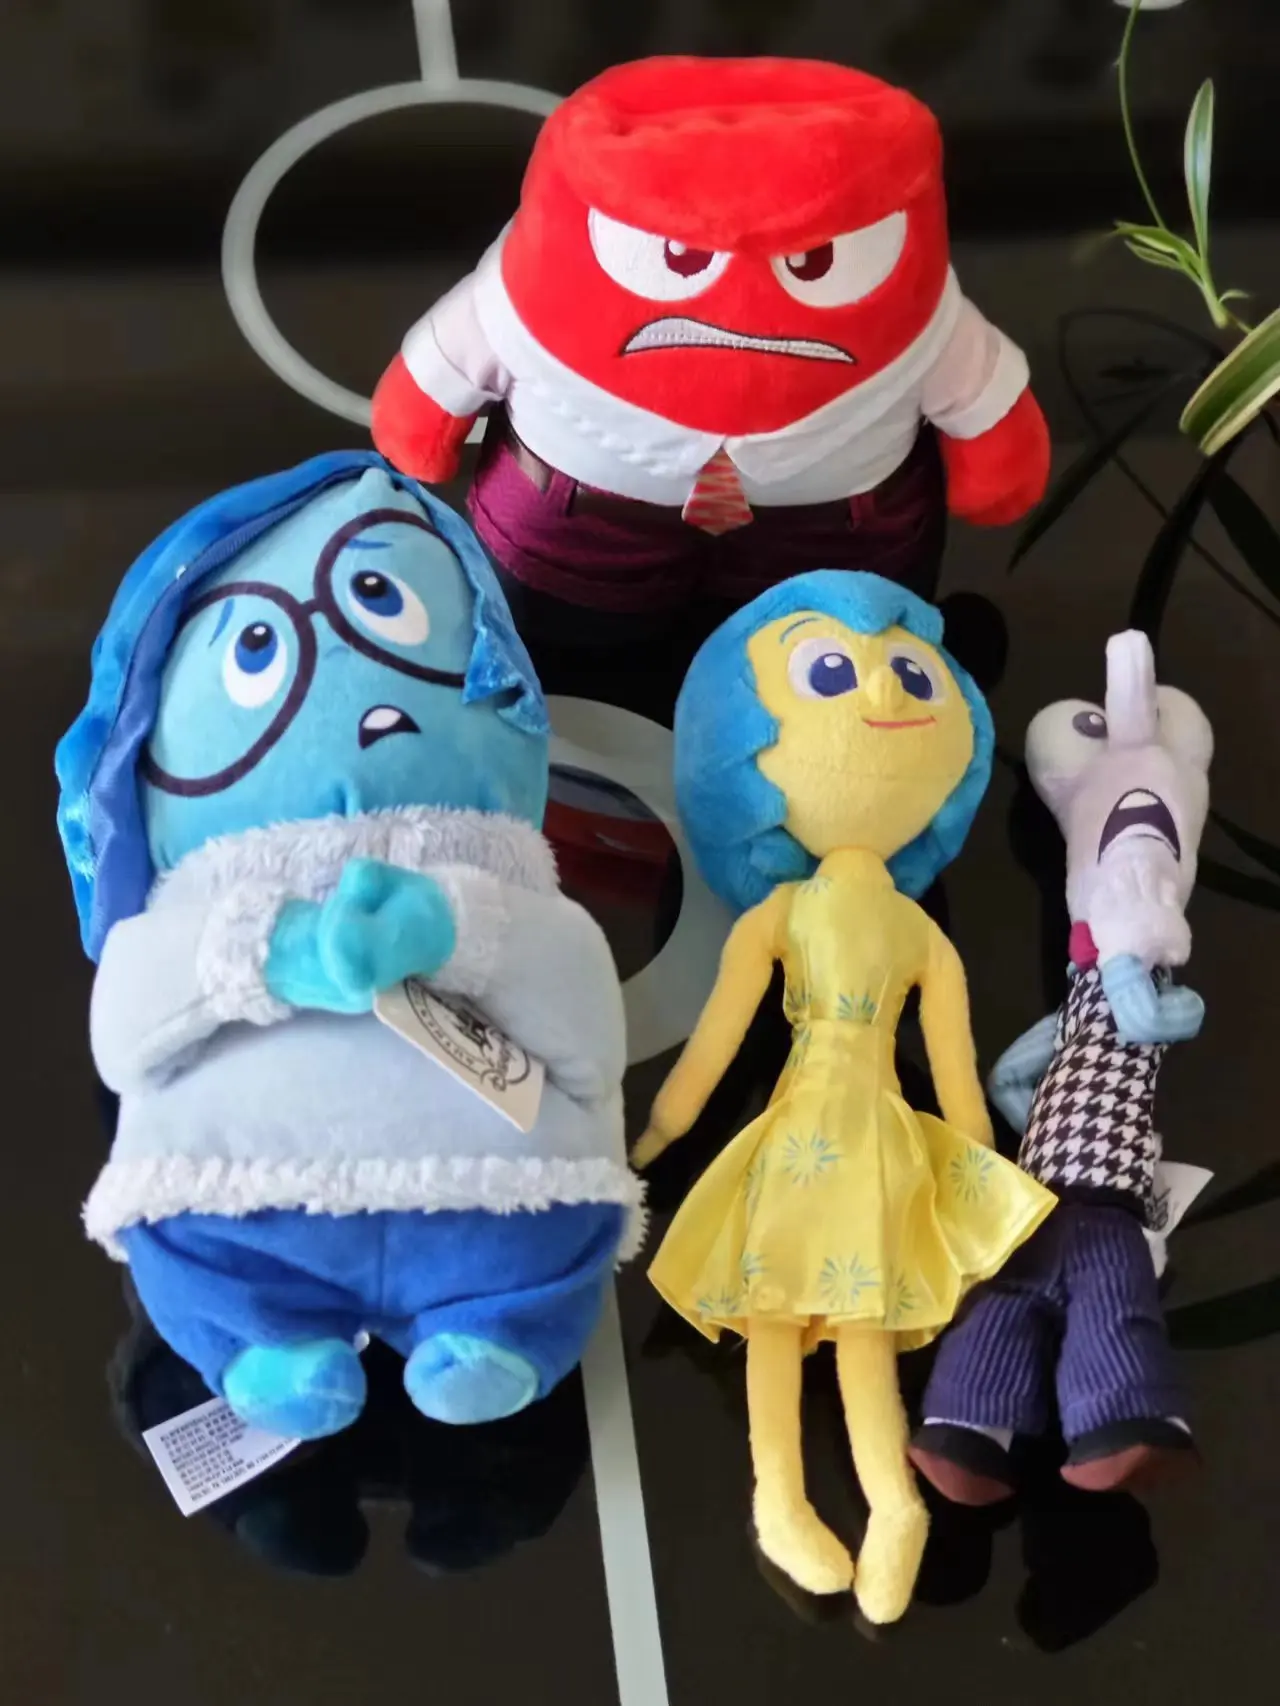 

Disney Movie Inside Out Cartoon characters Bing Bong Joy Sadness Anger Disgust Fear Plush toys doll Gifts for children